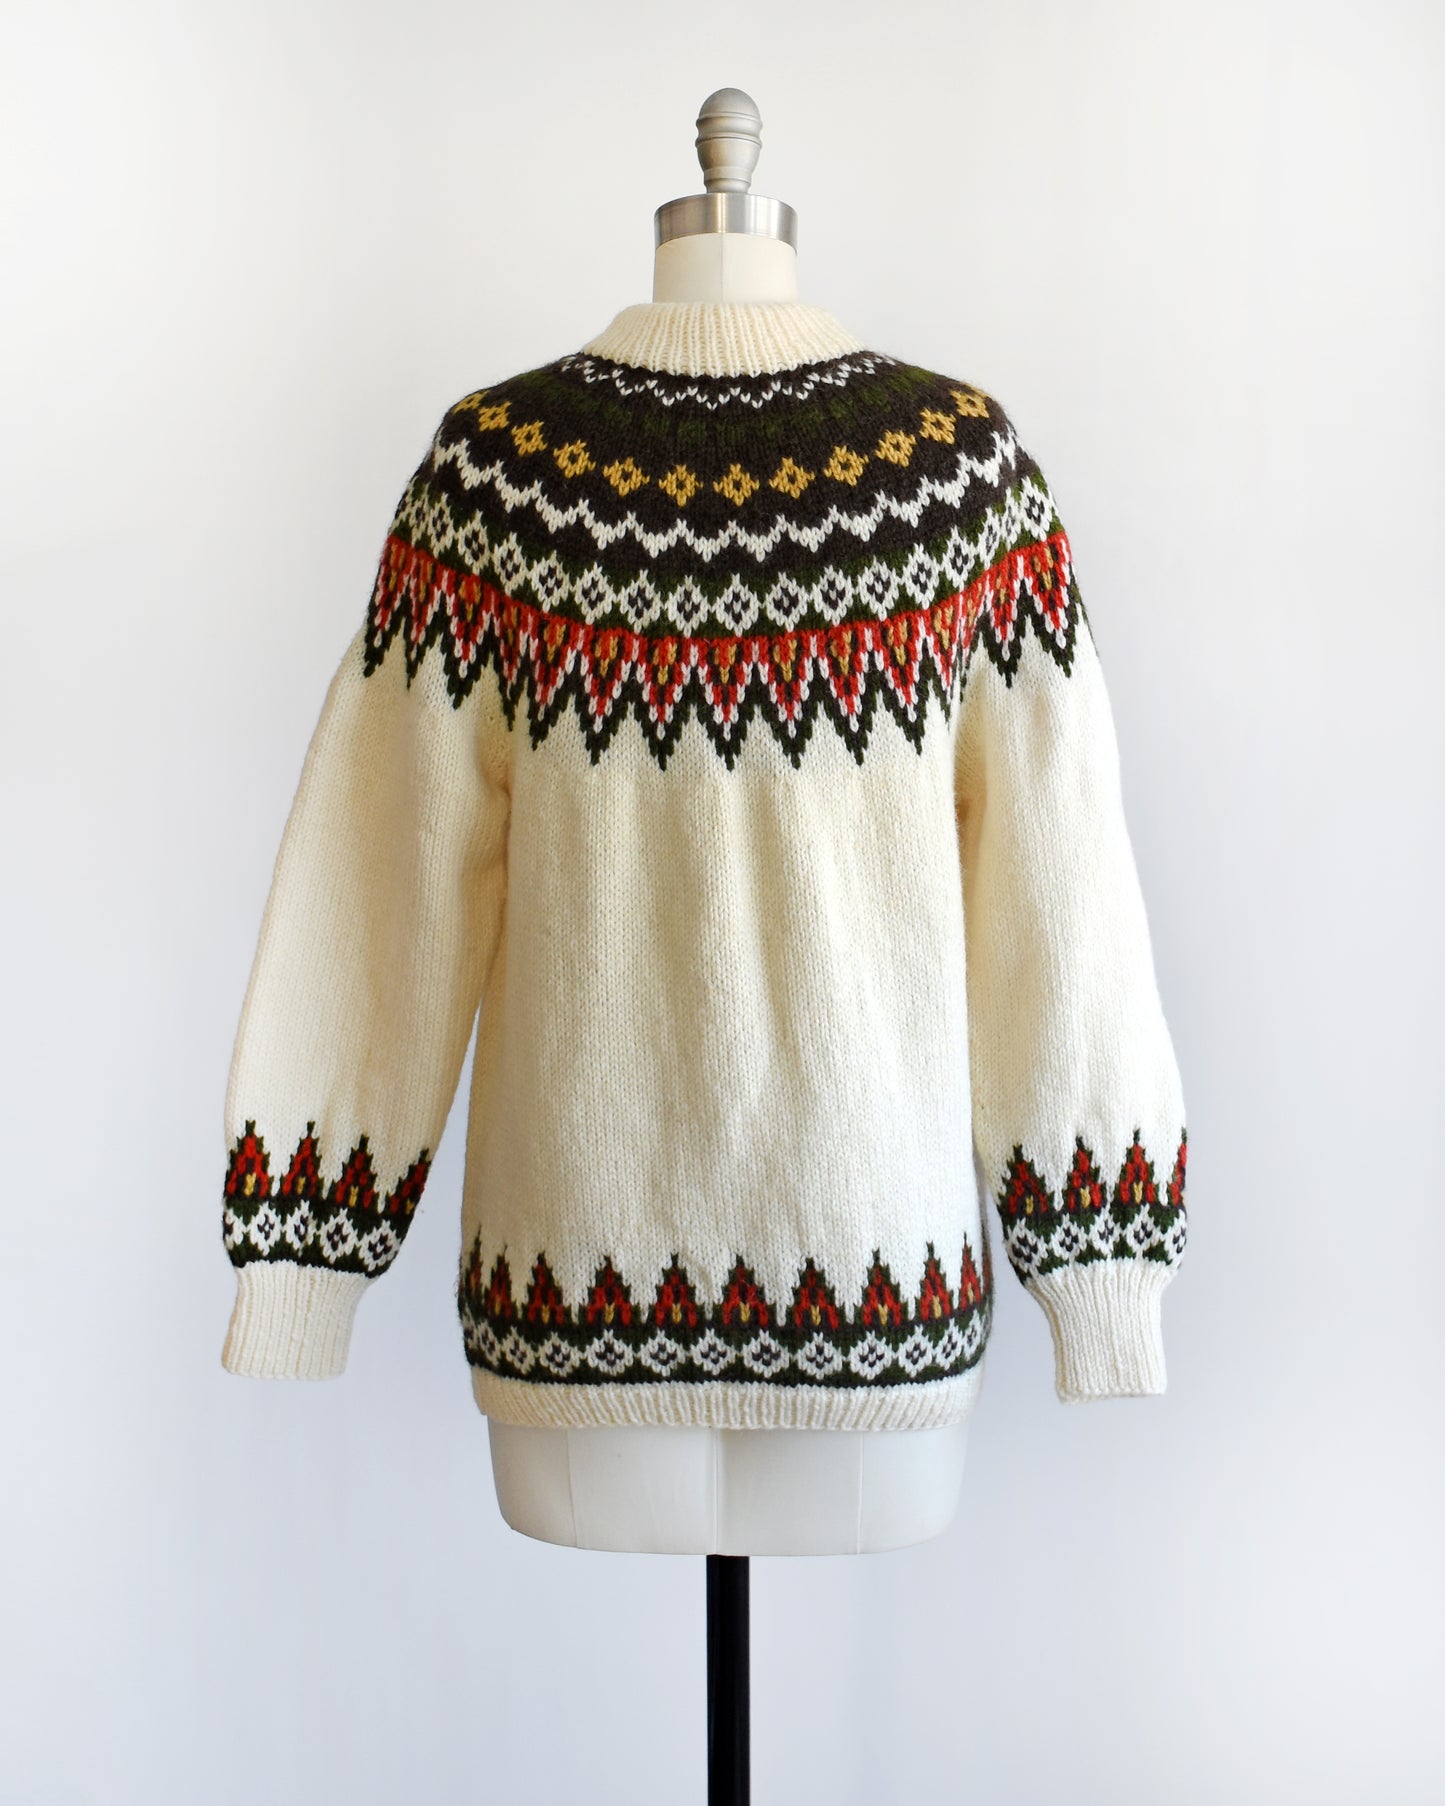 Back view of a vintage 1970s cream wool Nordic sweater with a brown, dark green, yellow, and red orange Fair Isle pattern around the collar and complimentary pattern on the hem and cuffs.